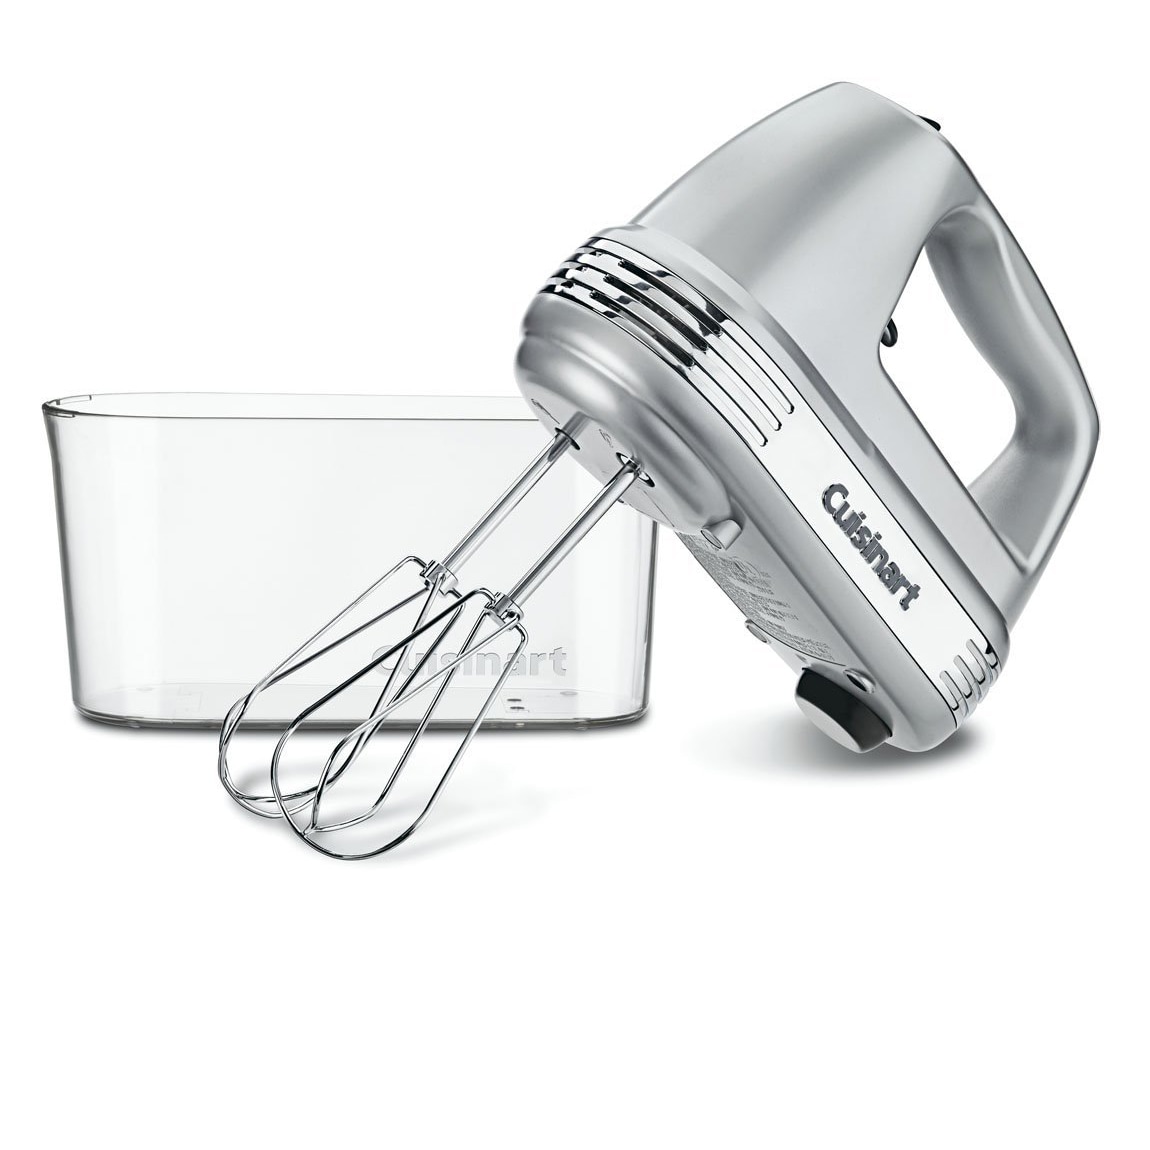 Hand Mixer 5 Stainless Steel Accessories: Beaters x 2, Dough Hooks x 2,  Whisk x1